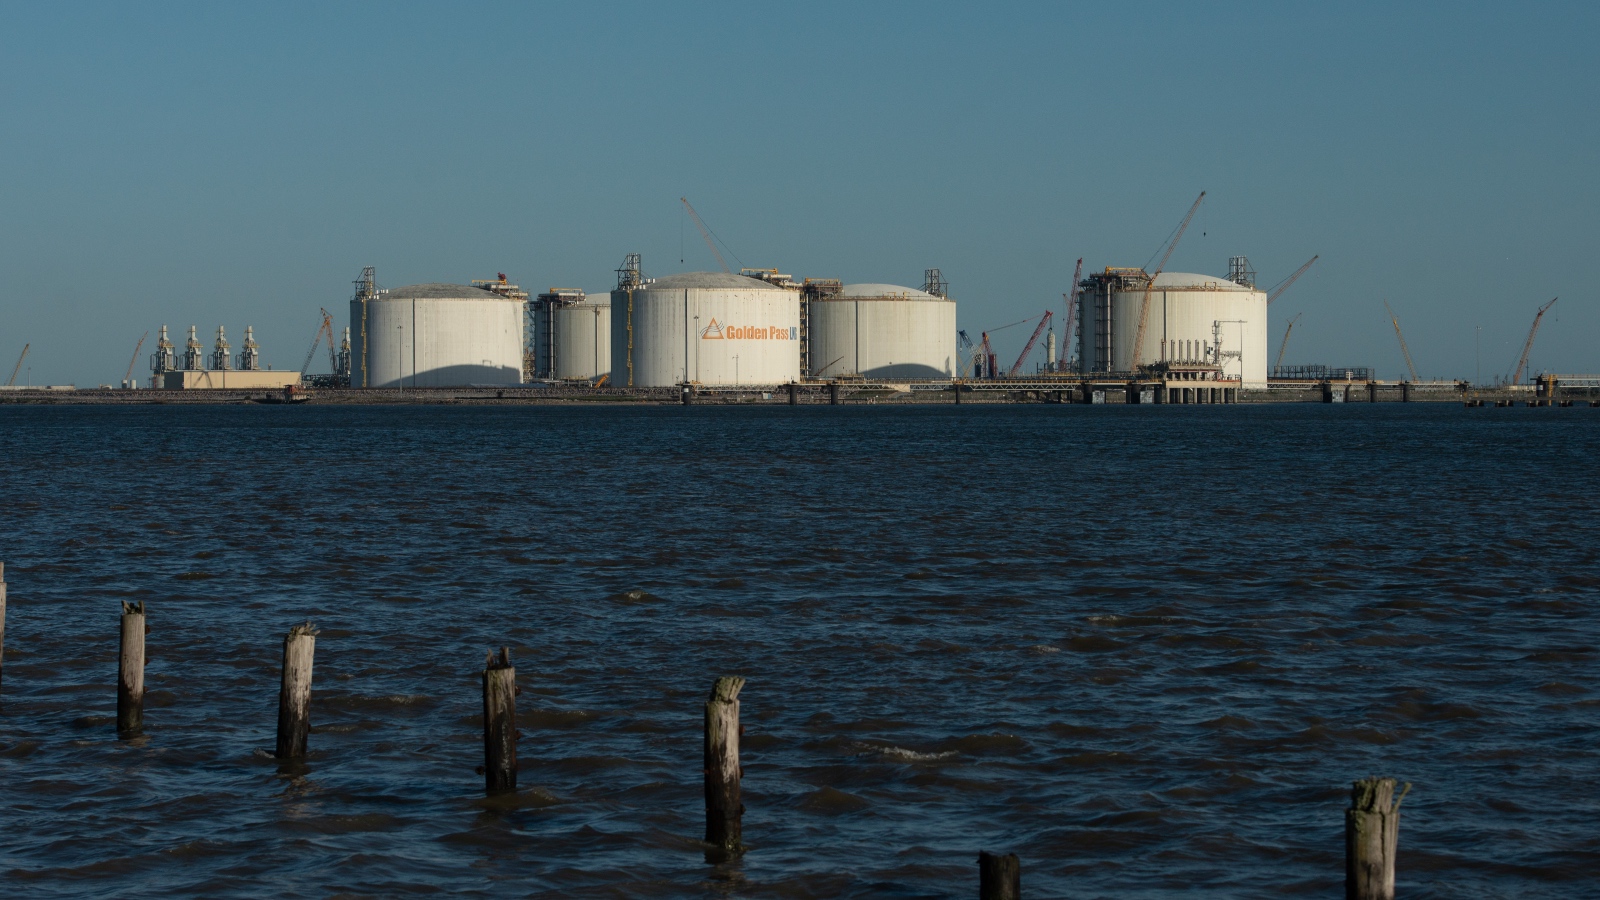 A row of low, wide cylindrical storage tanks against dark water with an evening sky in the background